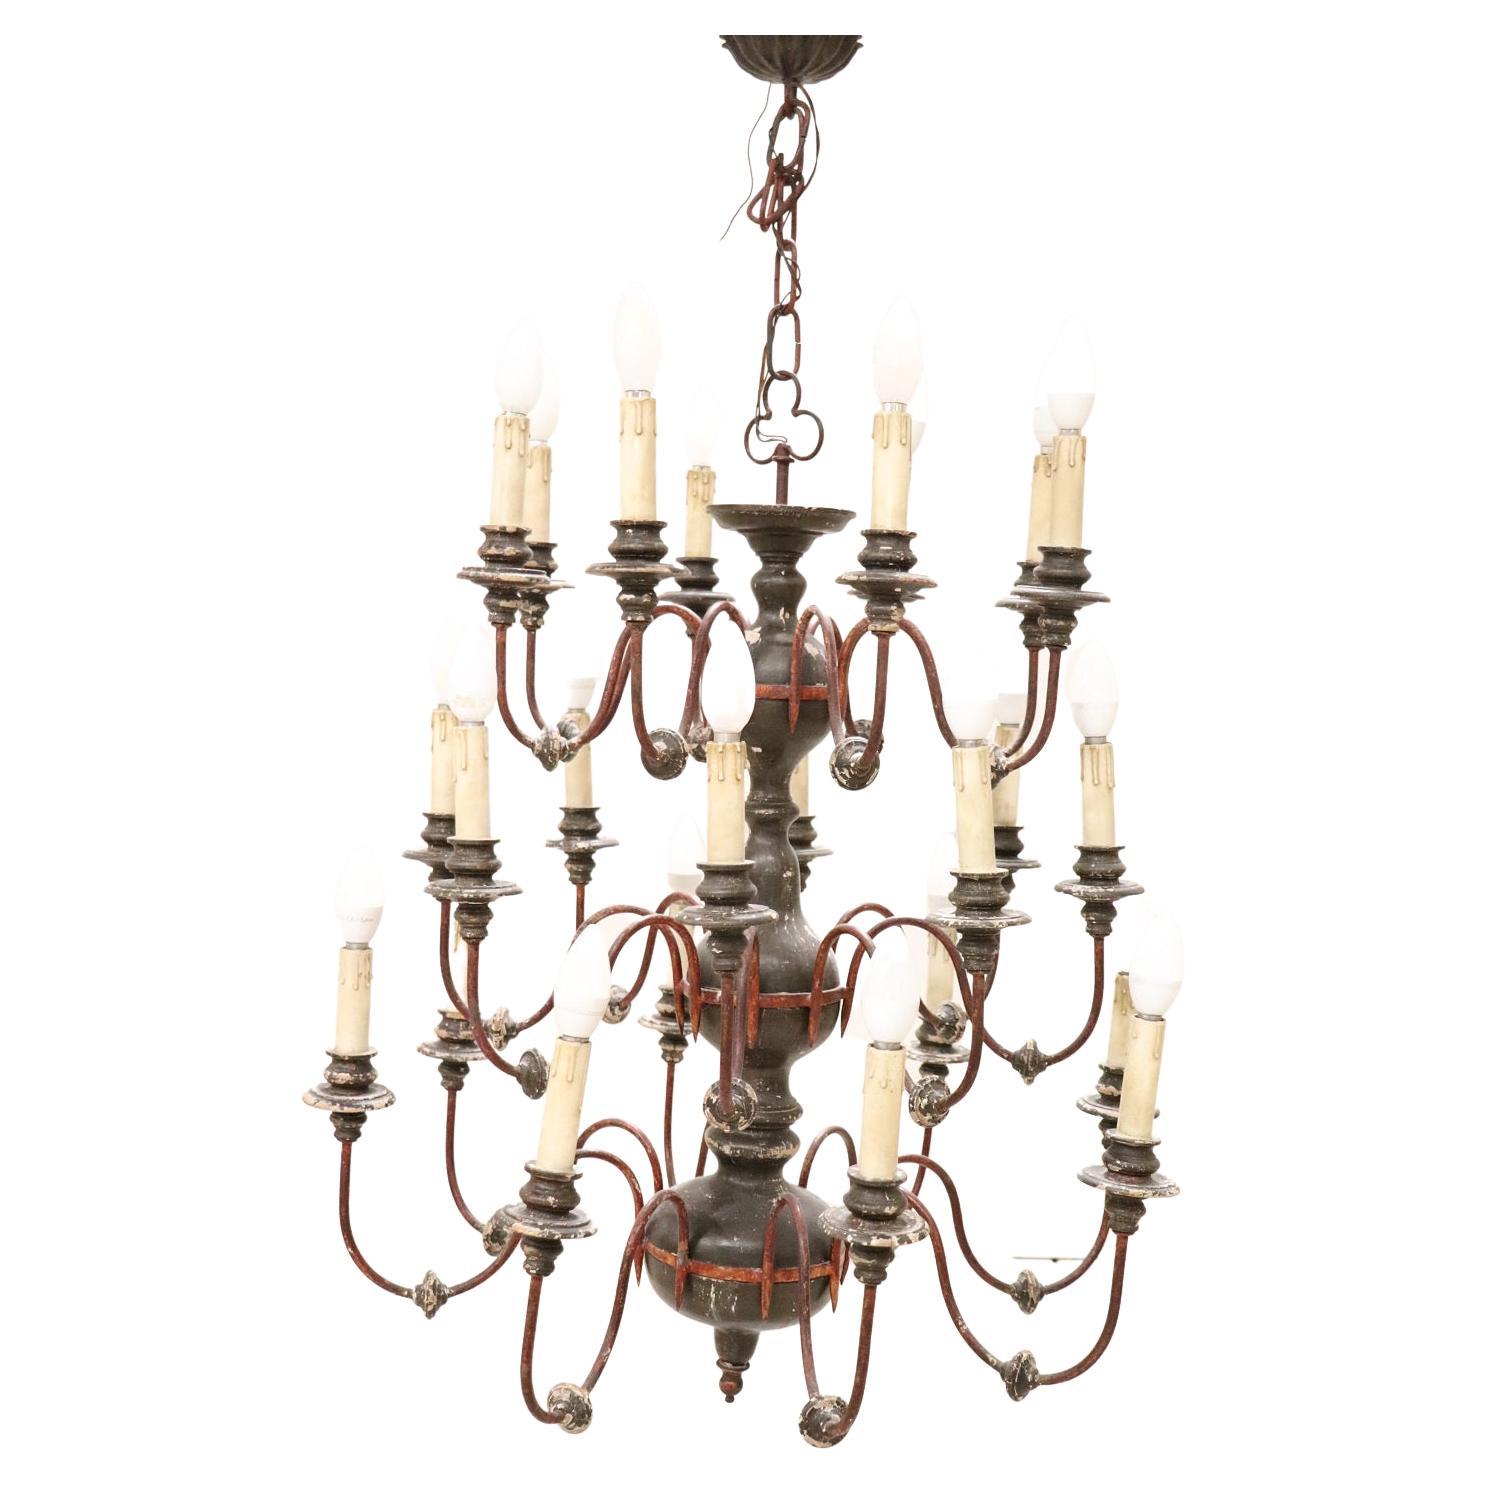 Early 20th Century Antique Larg Chandelier in Wood and Iron, 24 Bulbs